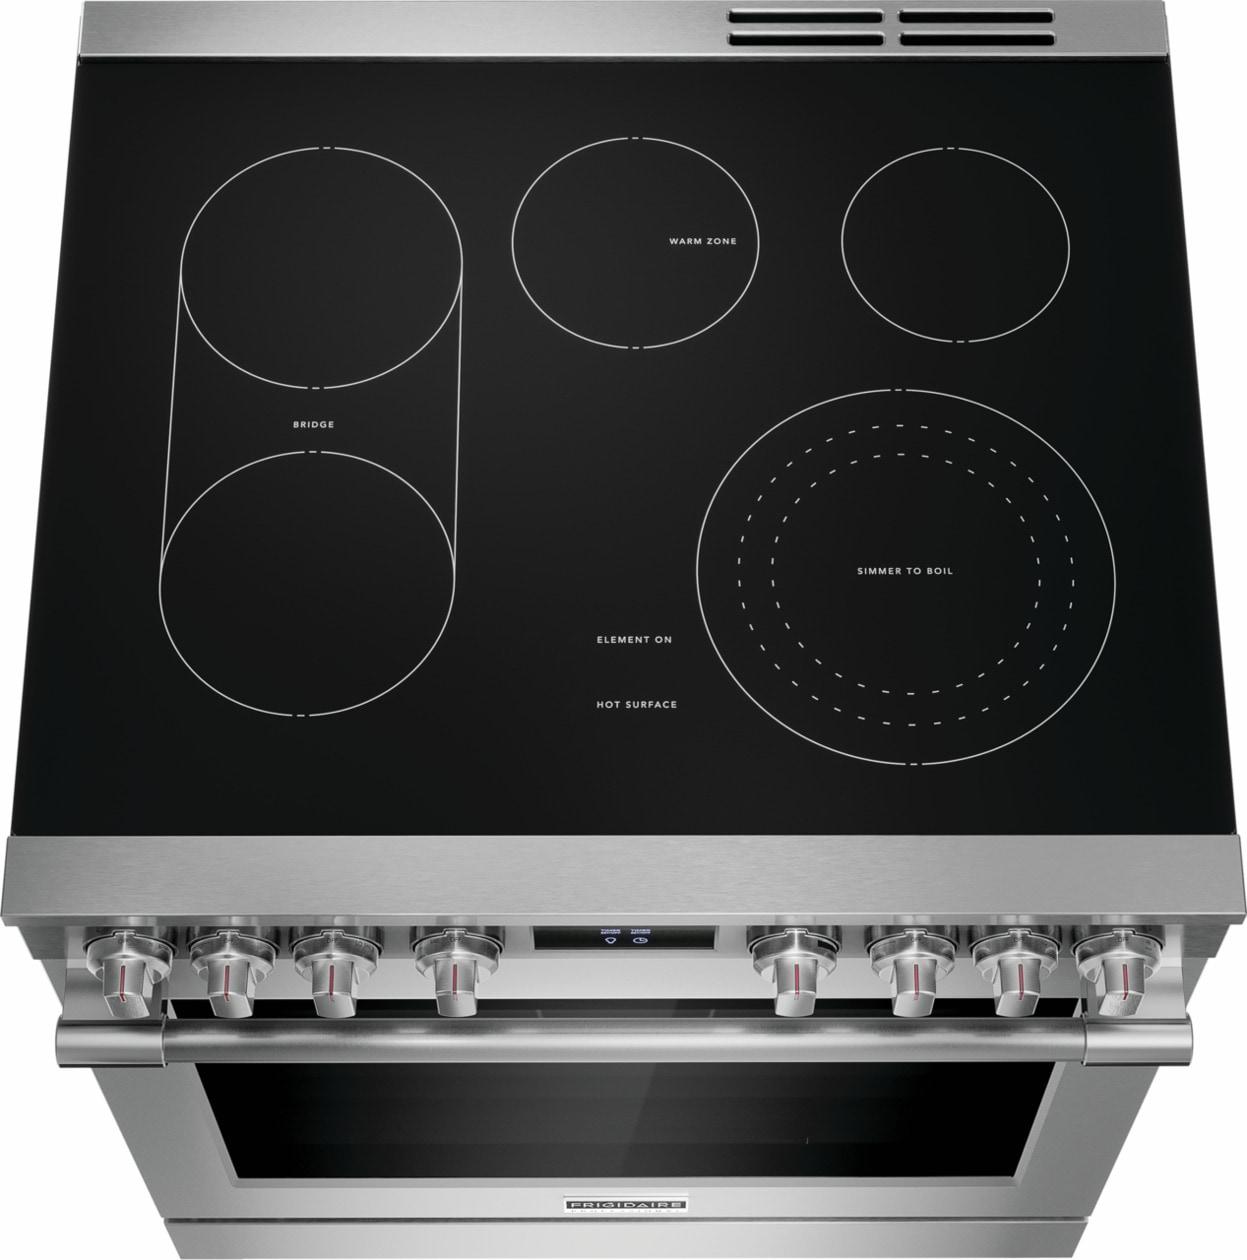 Frigidaire Professional 30" Electric Range with No Preheat and Air Fry